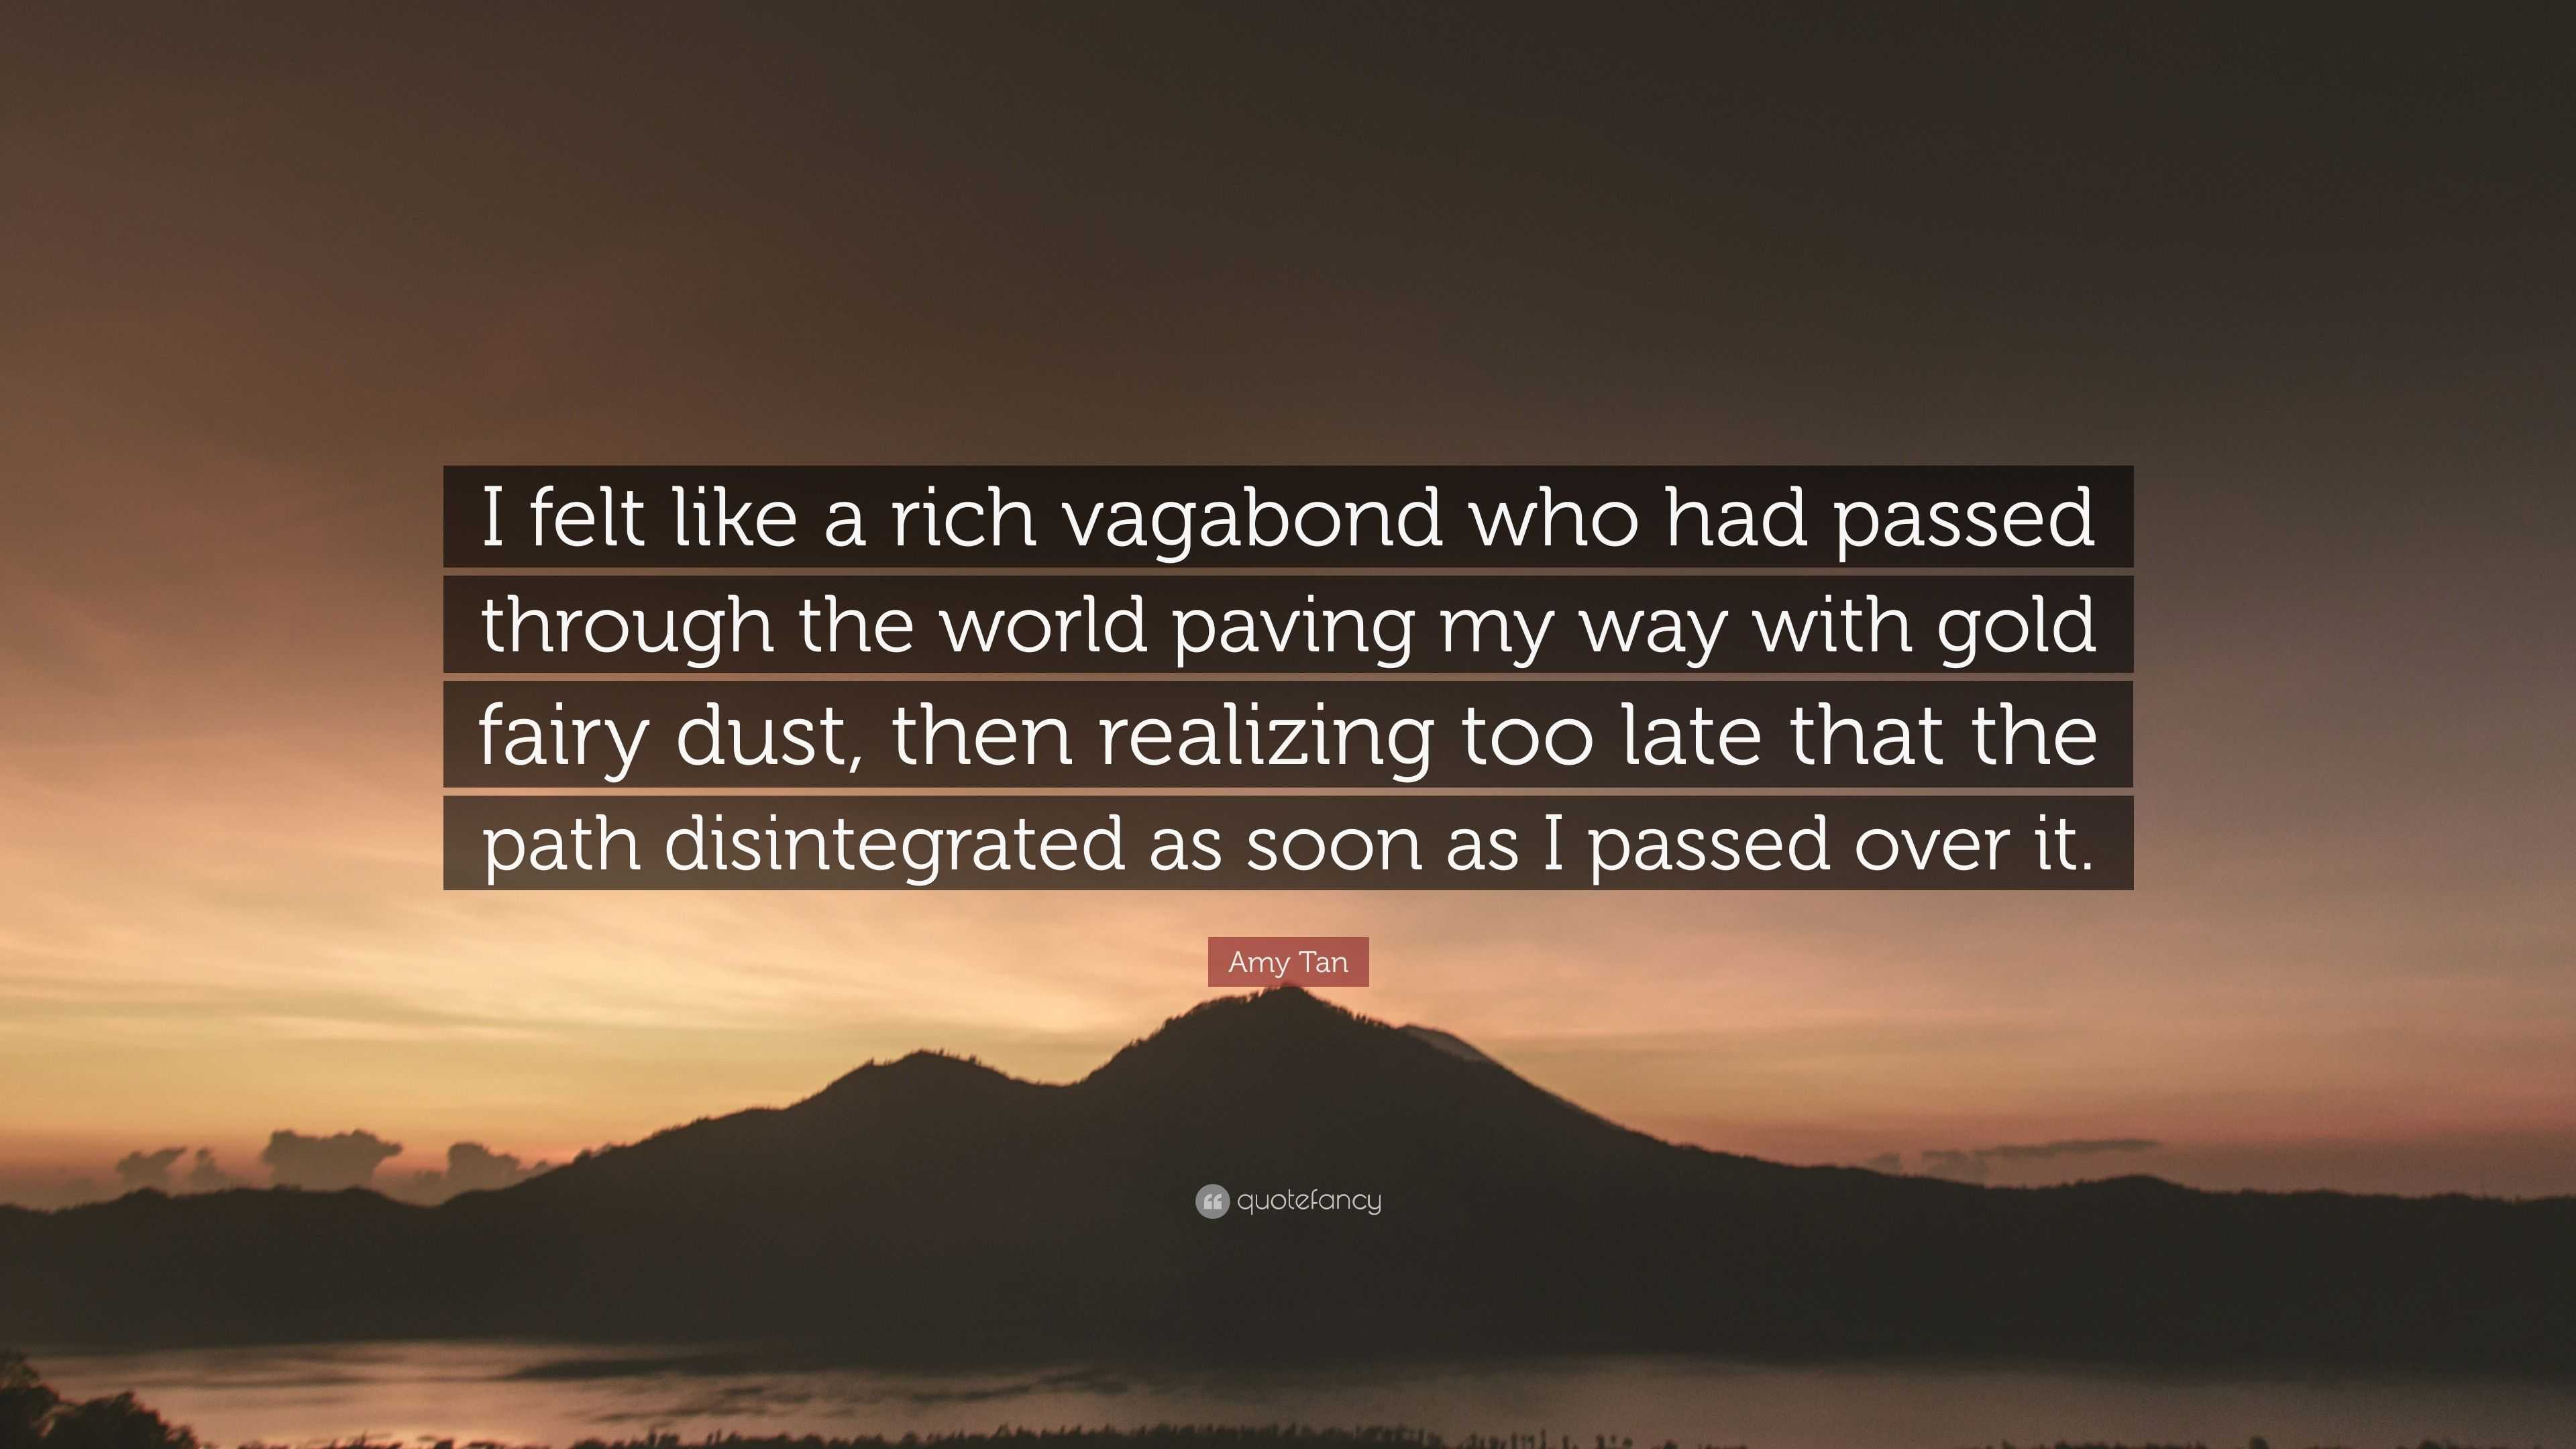 på trods af hektar Med venlig hilsen Amy Tan Quote: “I felt like a rich vagabond who had passed through the  world paving my way with gold fairy dust, then realizing too late...”